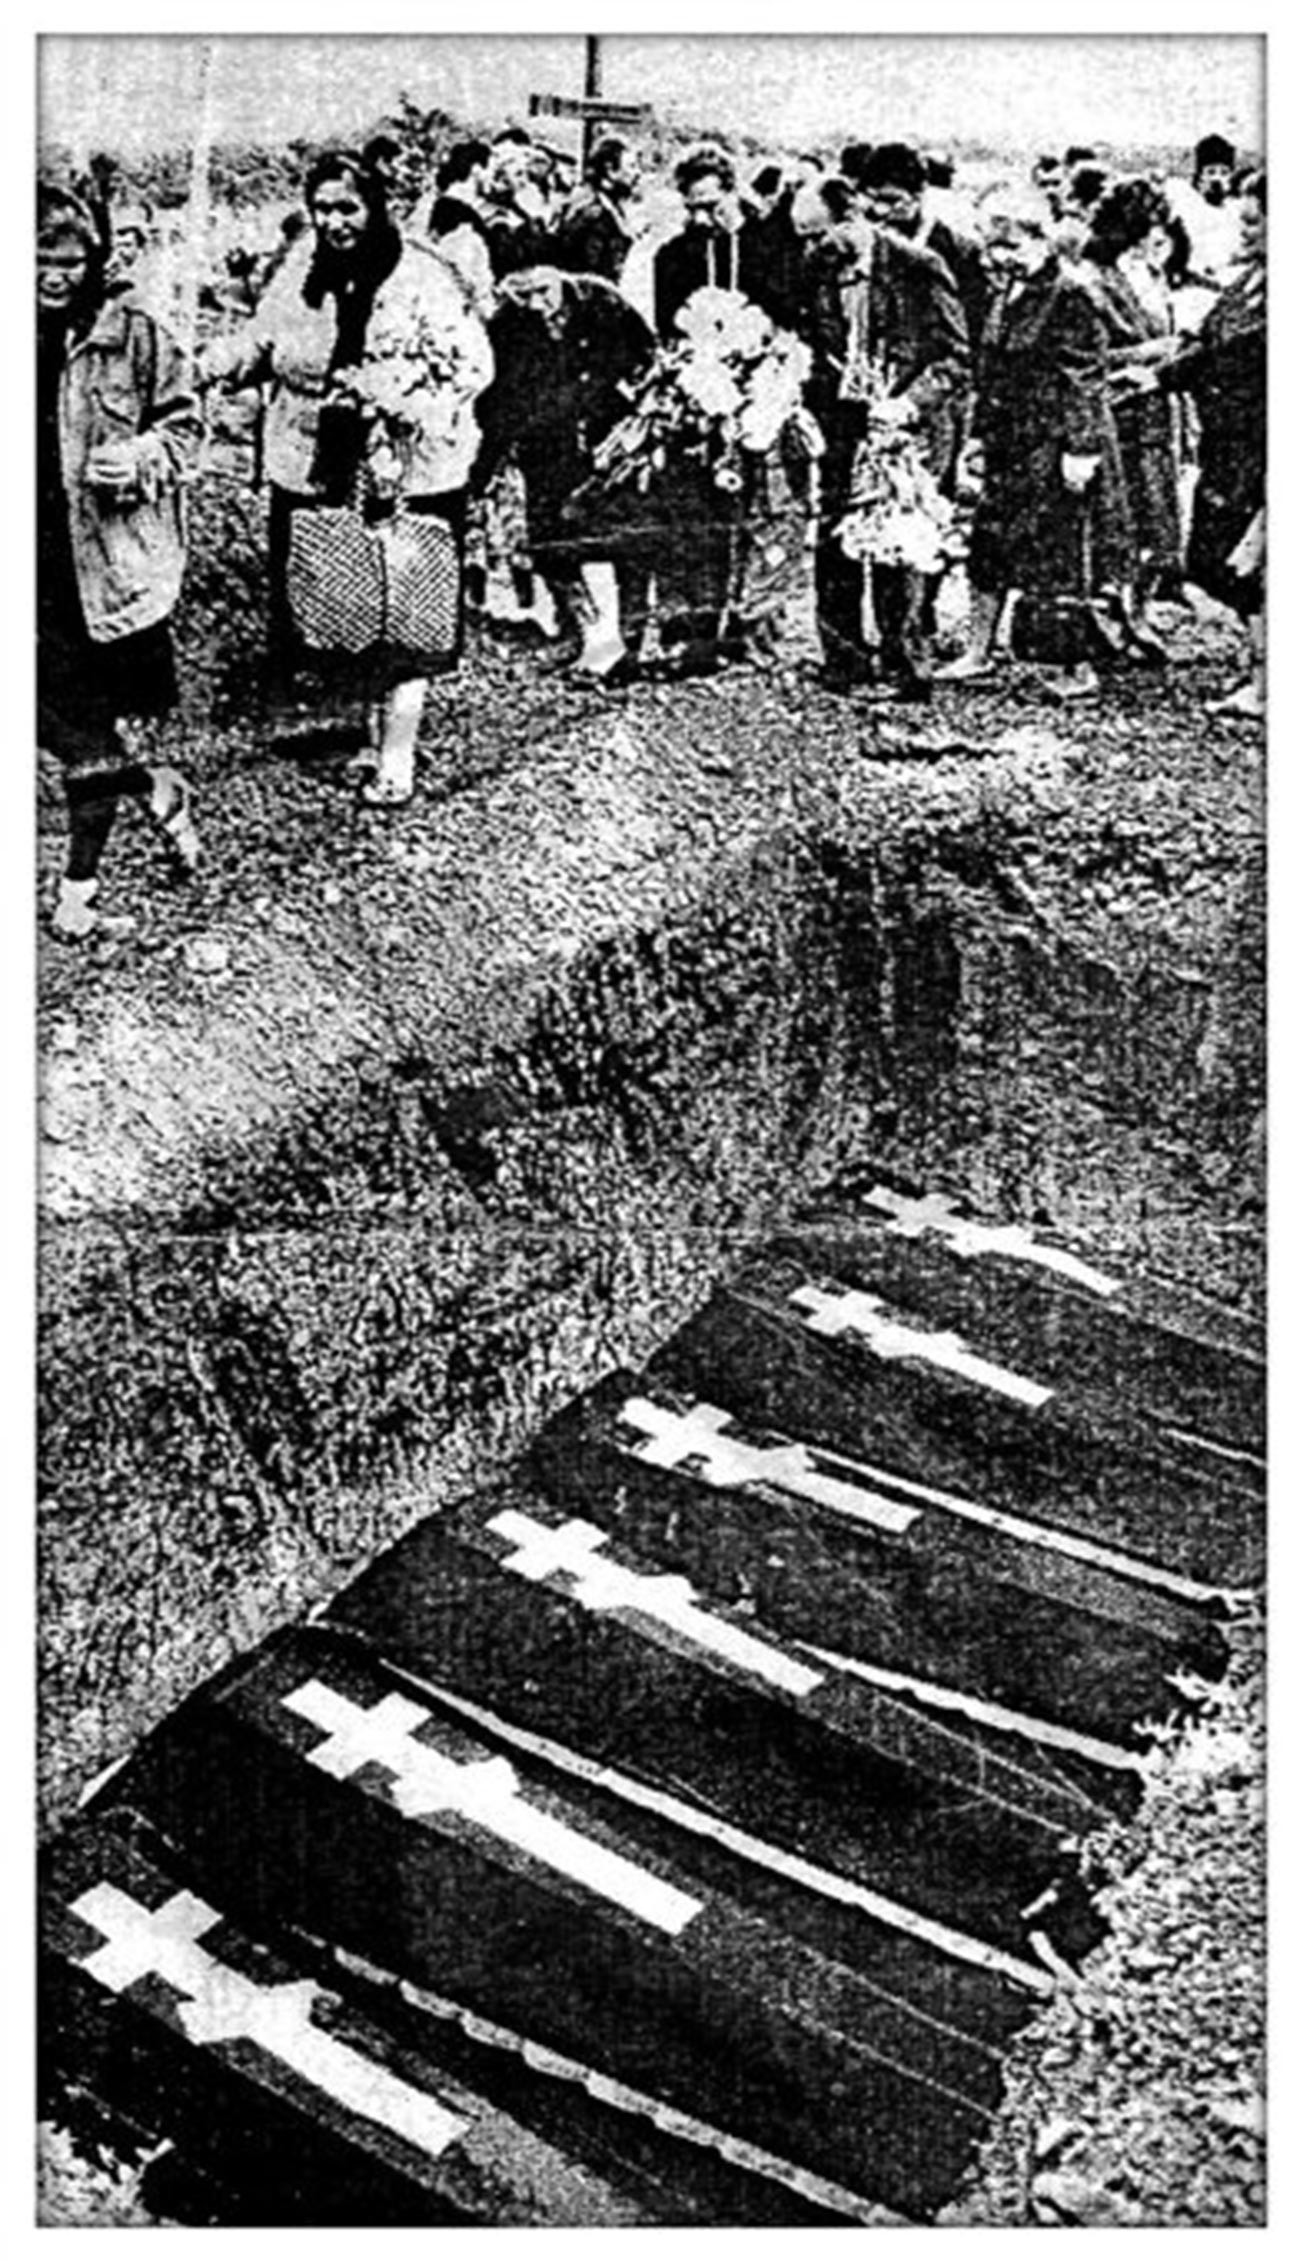 The symbolic reburial of the 1962 massacre's victims on a graveyard in Novocherkassk, 1994 